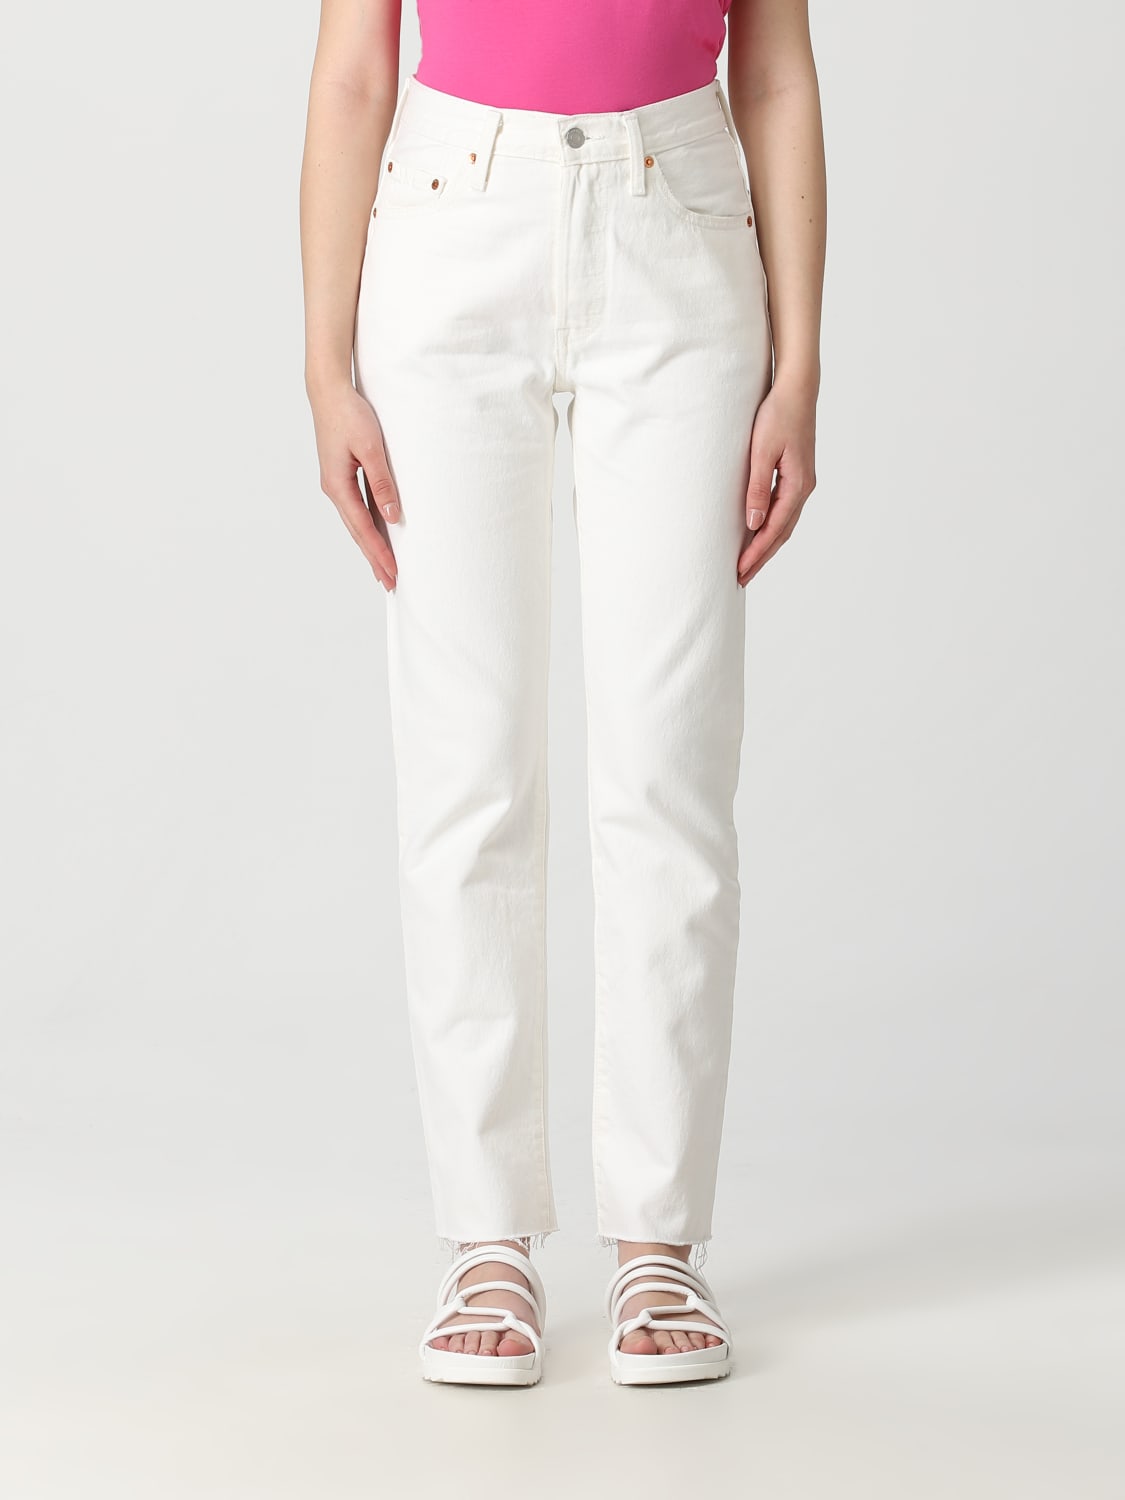 LEVI'S: jeans for woman - White | Levi's jeans 125010413 online on ...